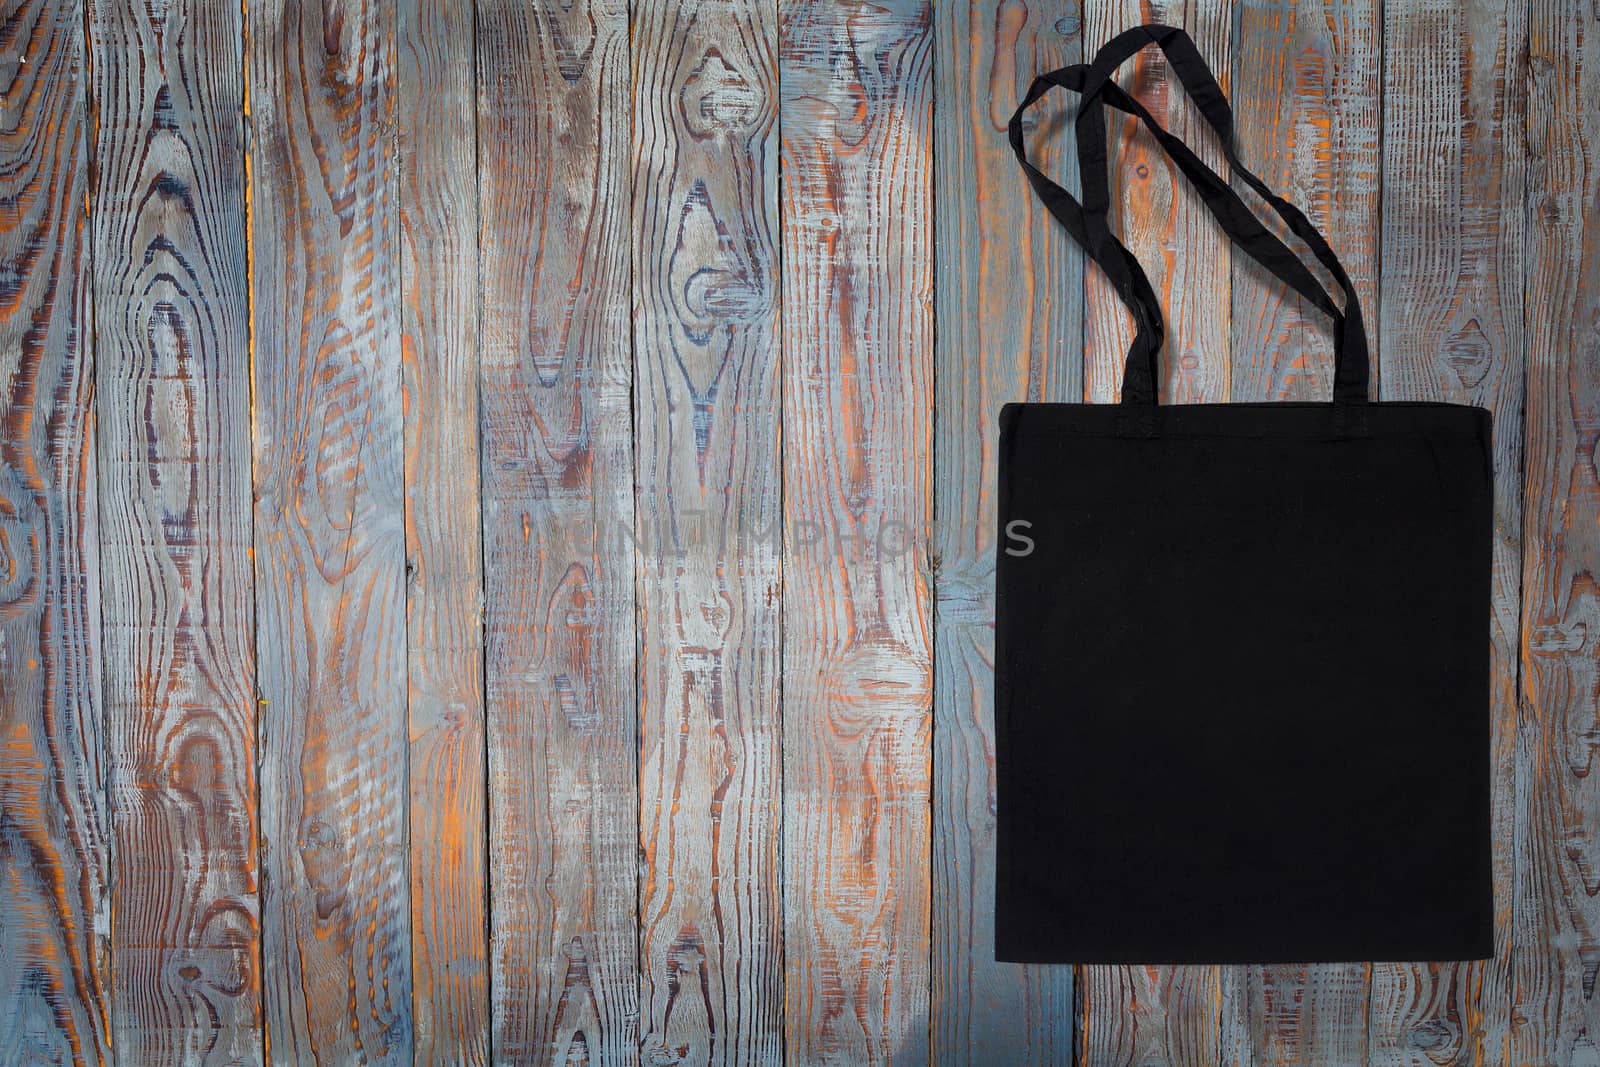 black cotton bag for shopping on a wooden background